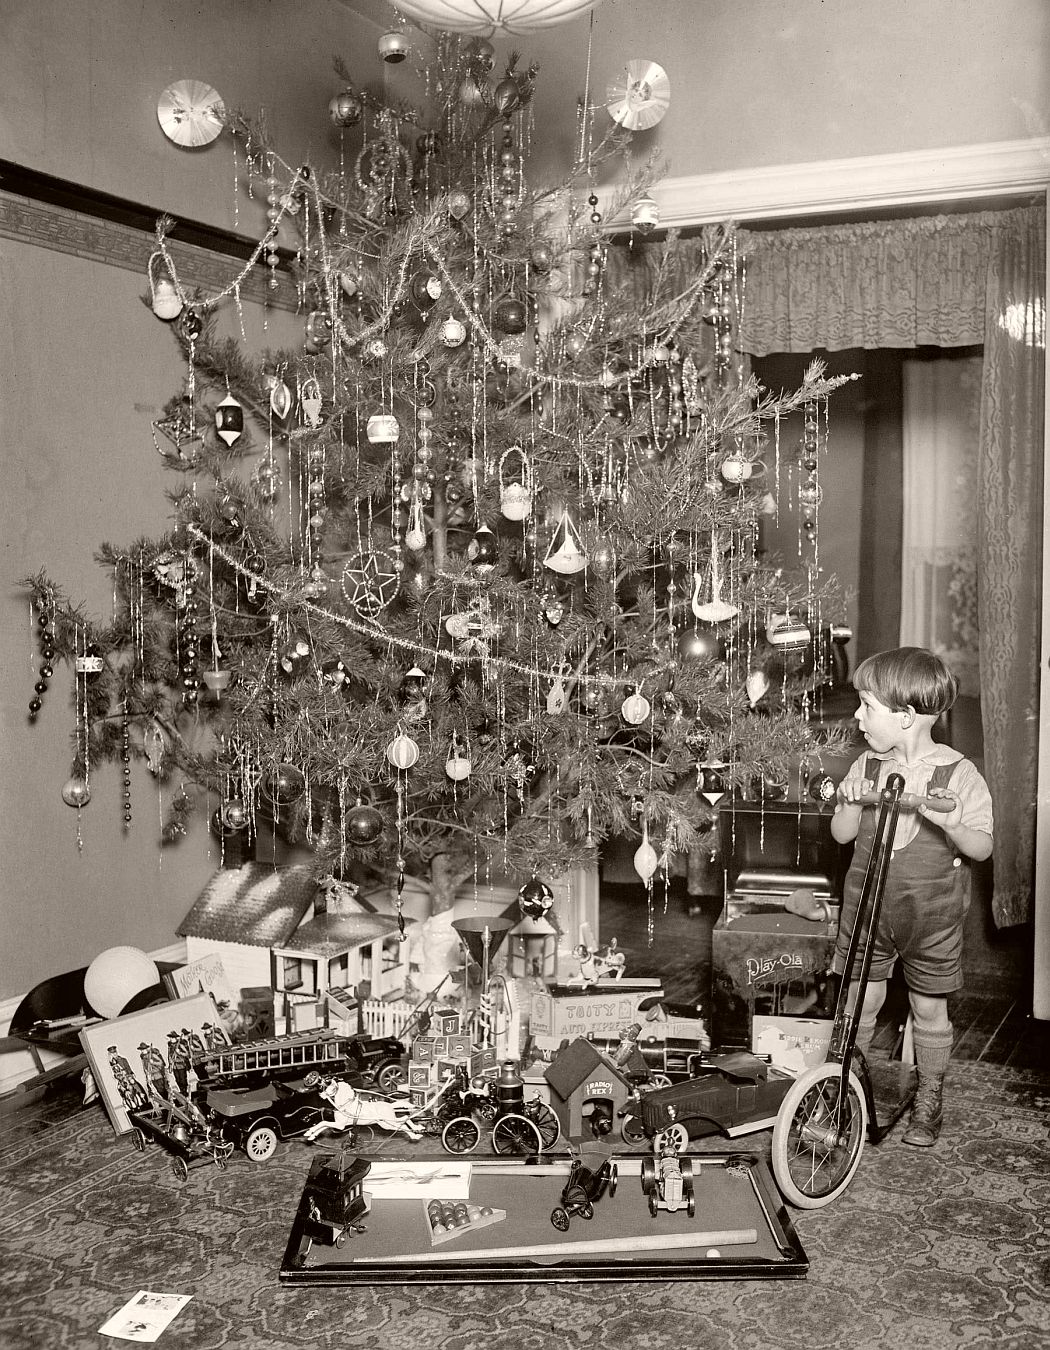 Vintage: Christmas Trees in the past